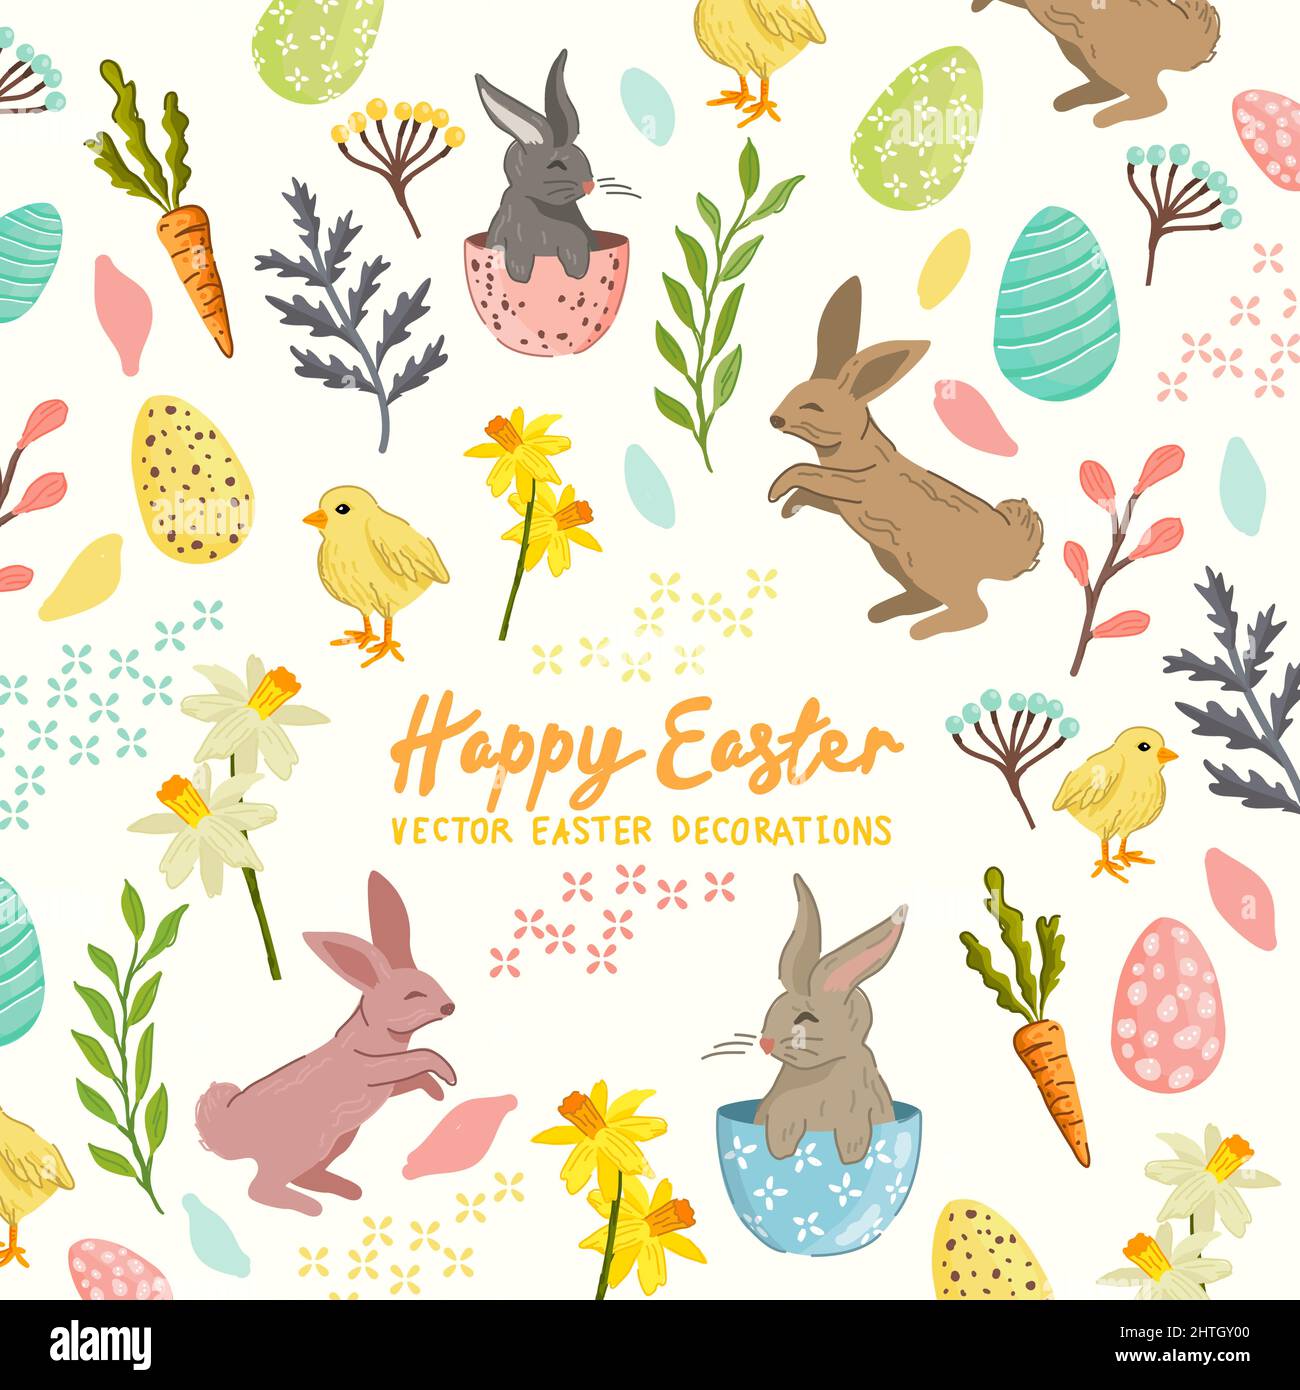 Festive easter pattern elements with decorations, eggs and cute rabbits. Vector illustration. Stock Vector